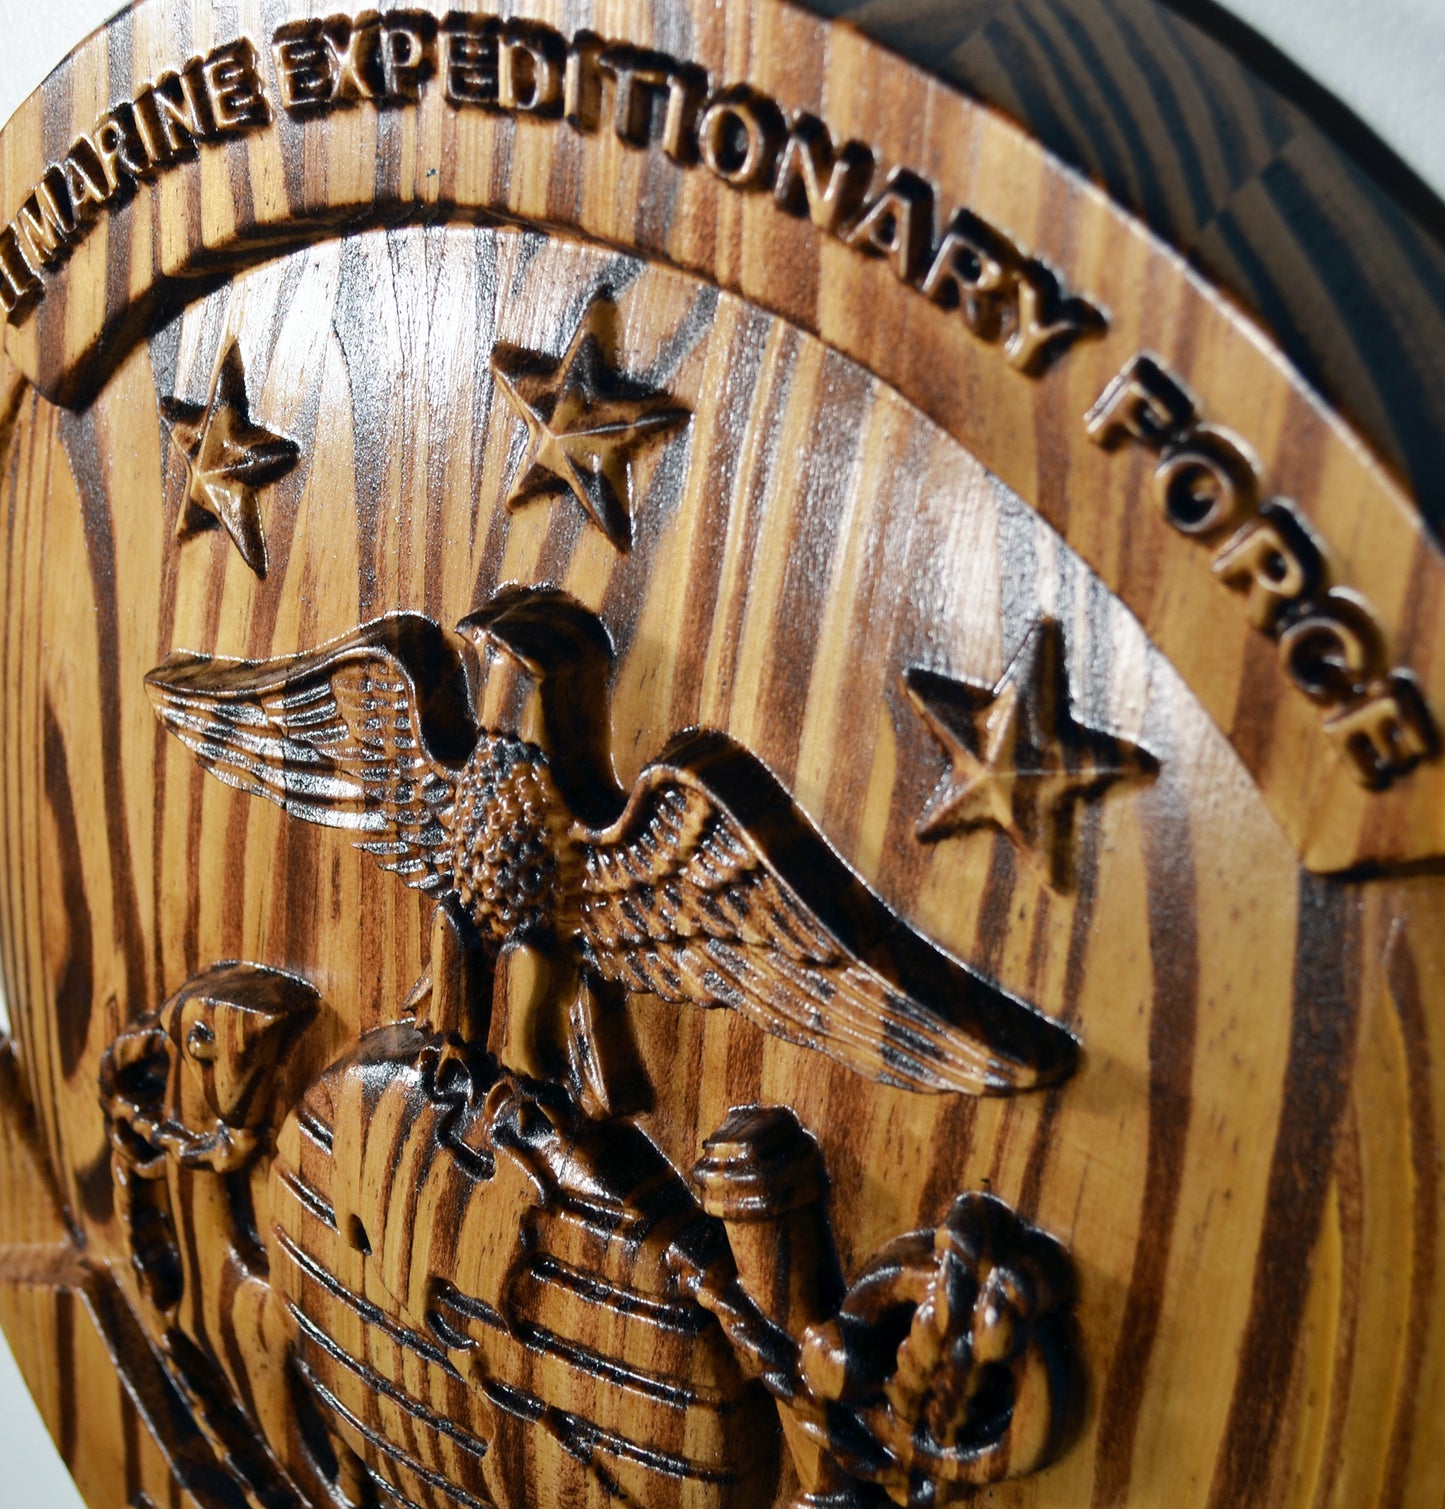 USMC II Marine Expeditionary Force, cnc, stained 3d wood carving, military plaque